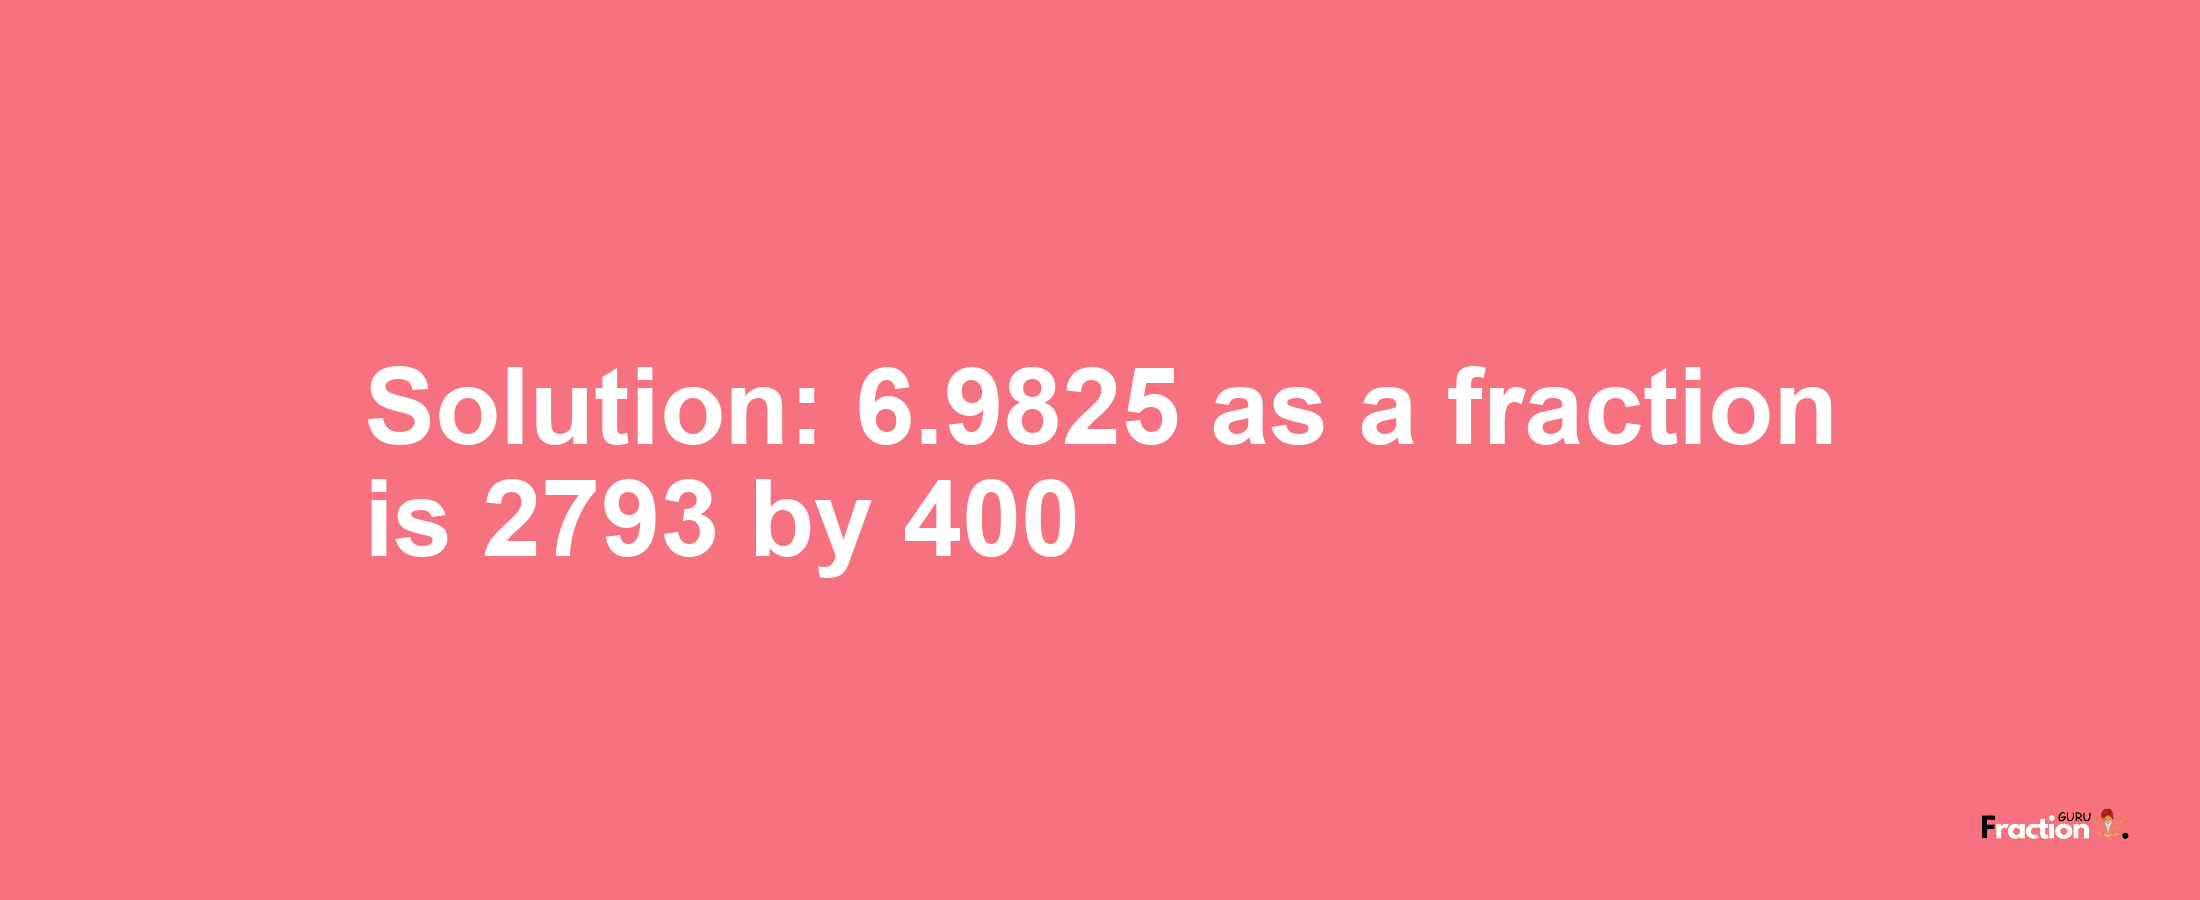 Solution:6.9825 as a fraction is 2793/400